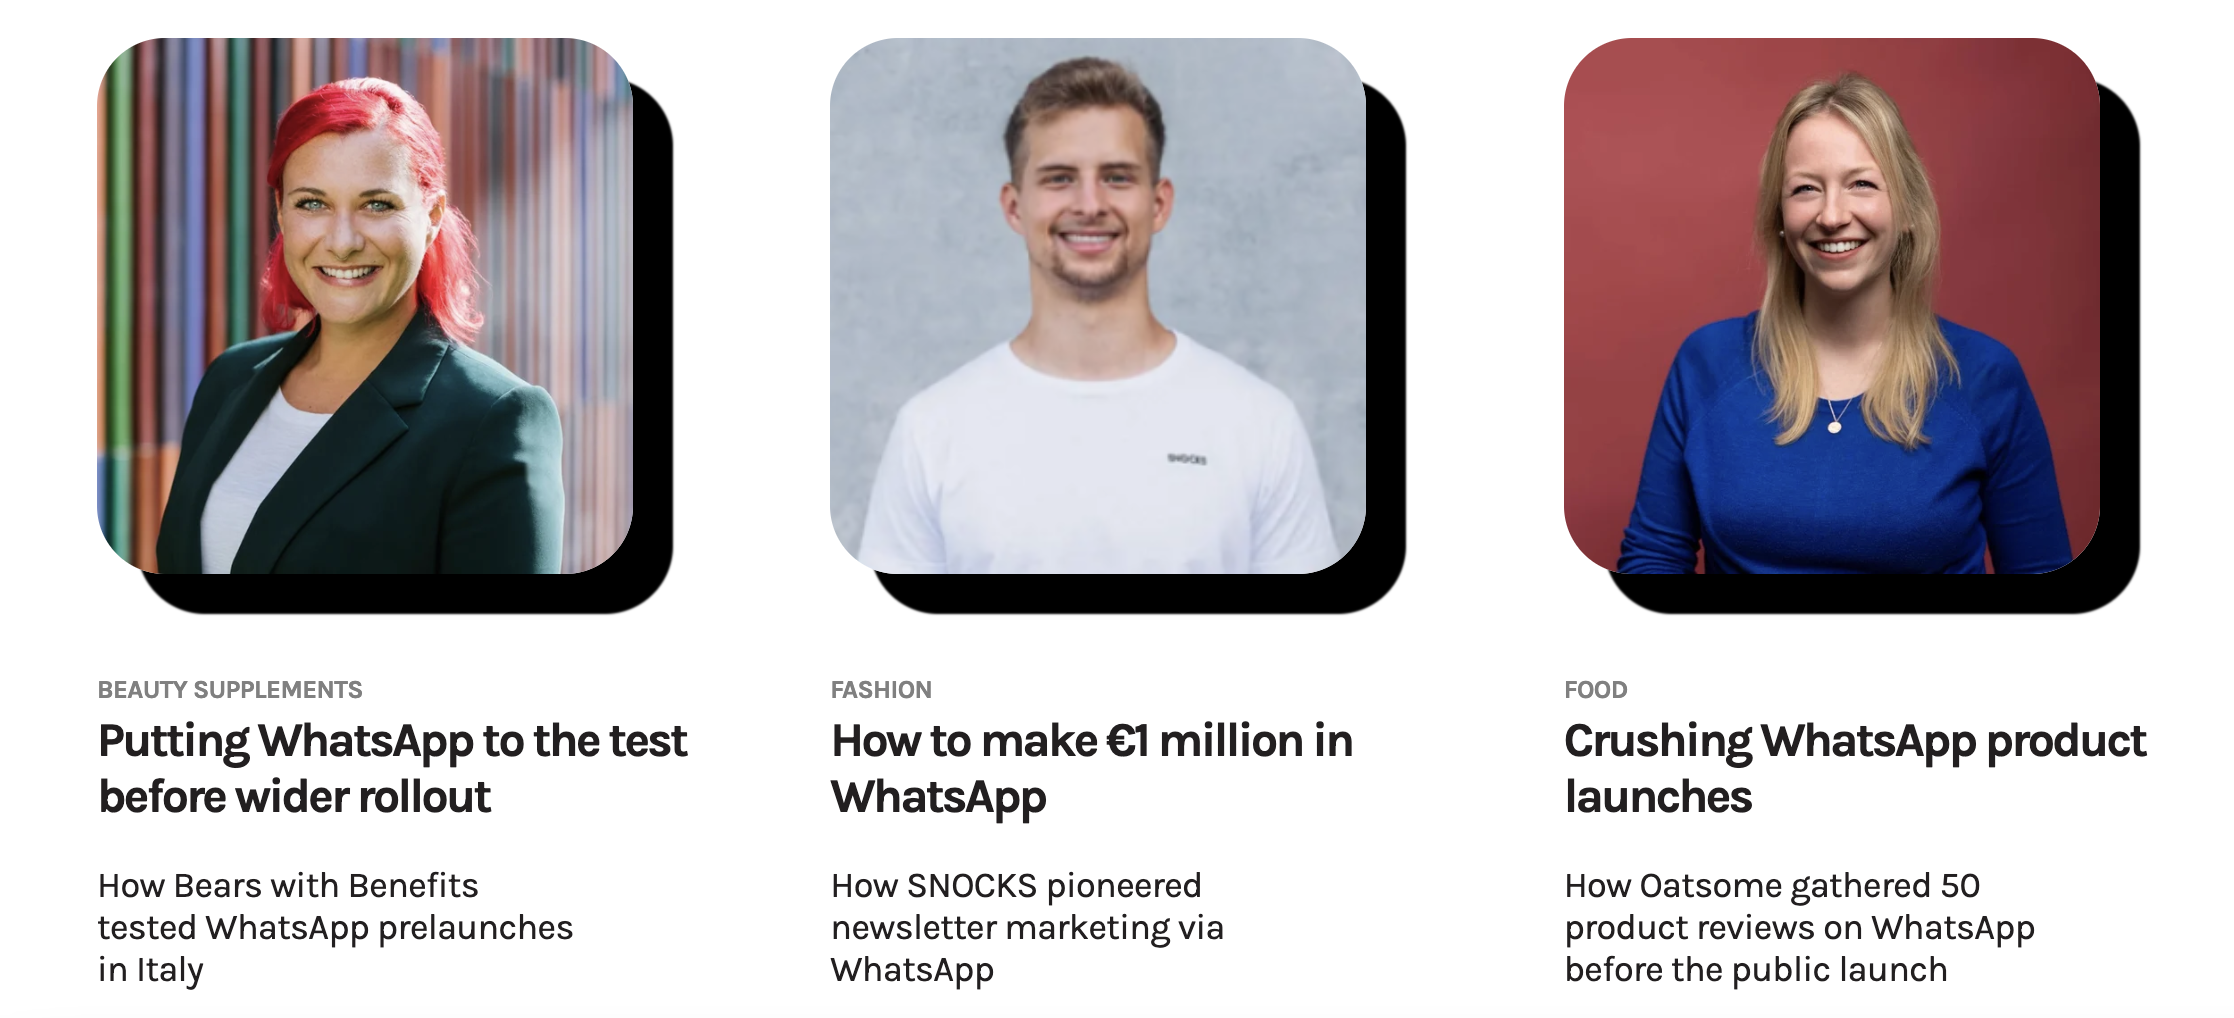 charles clients and WhatsApp eCommerce pioneers: Bears with Benefits, SNOCKS and Oatsome